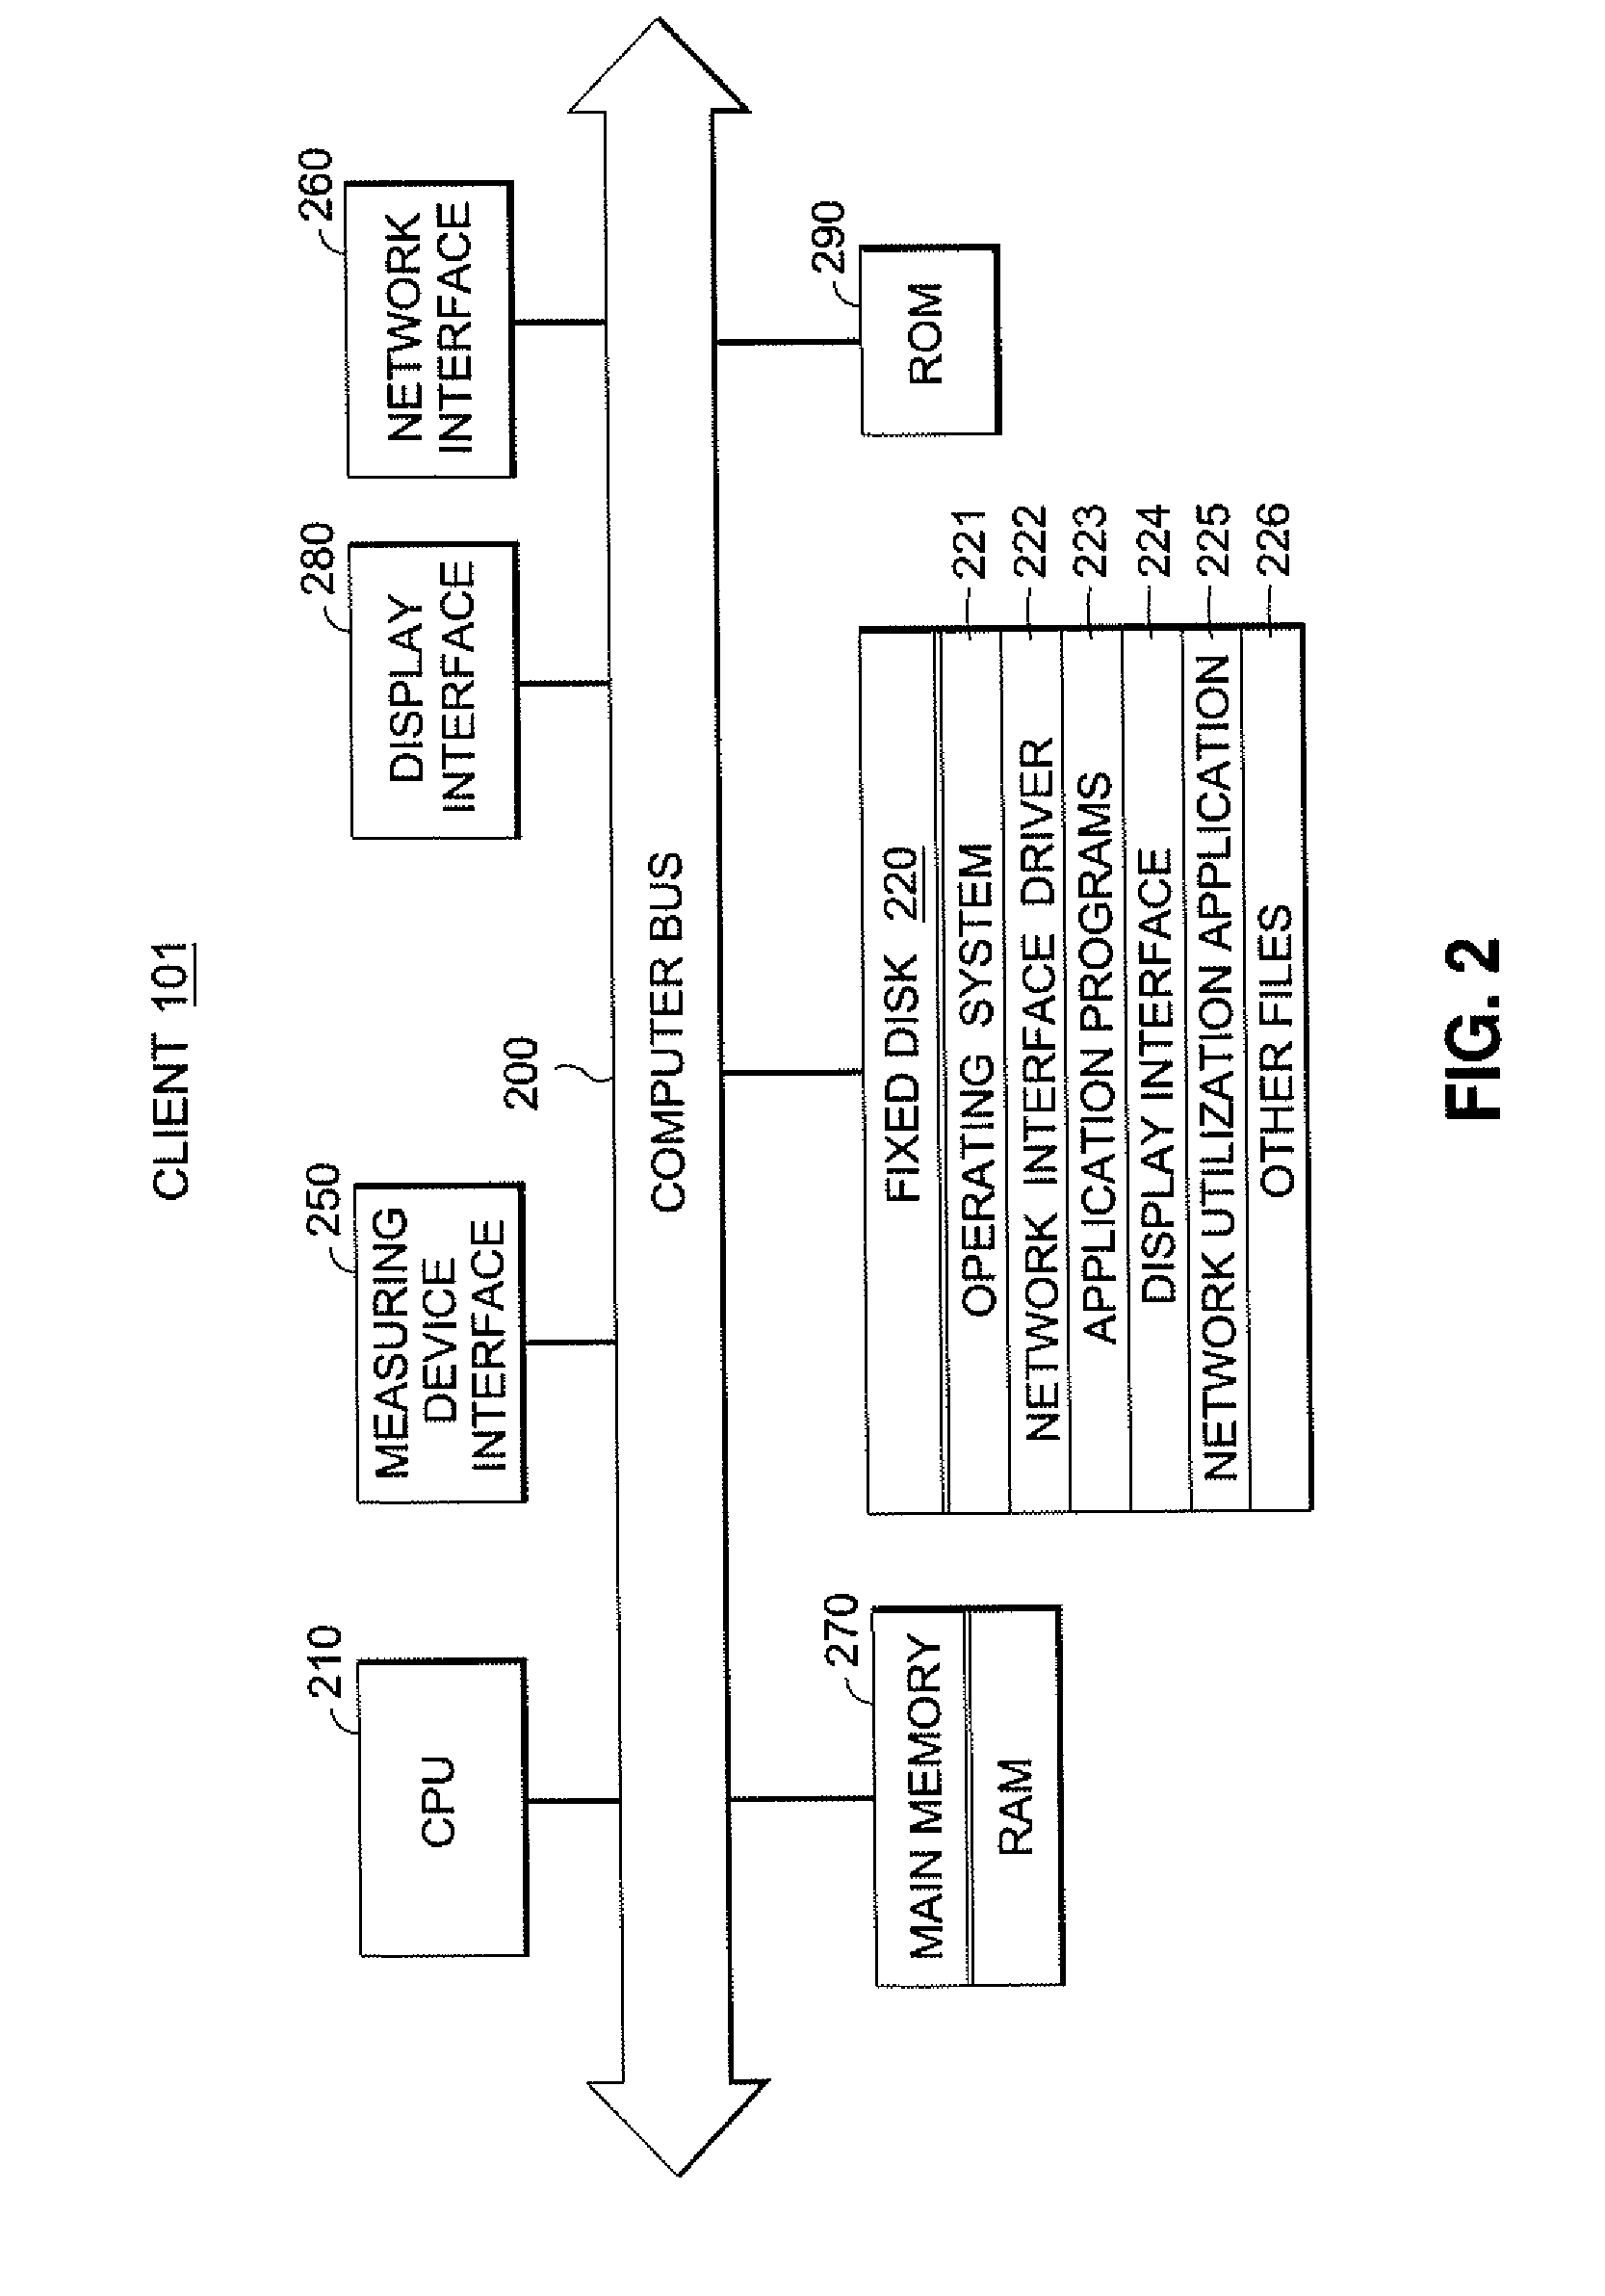 Network streaming of a video media from a media server to a media client